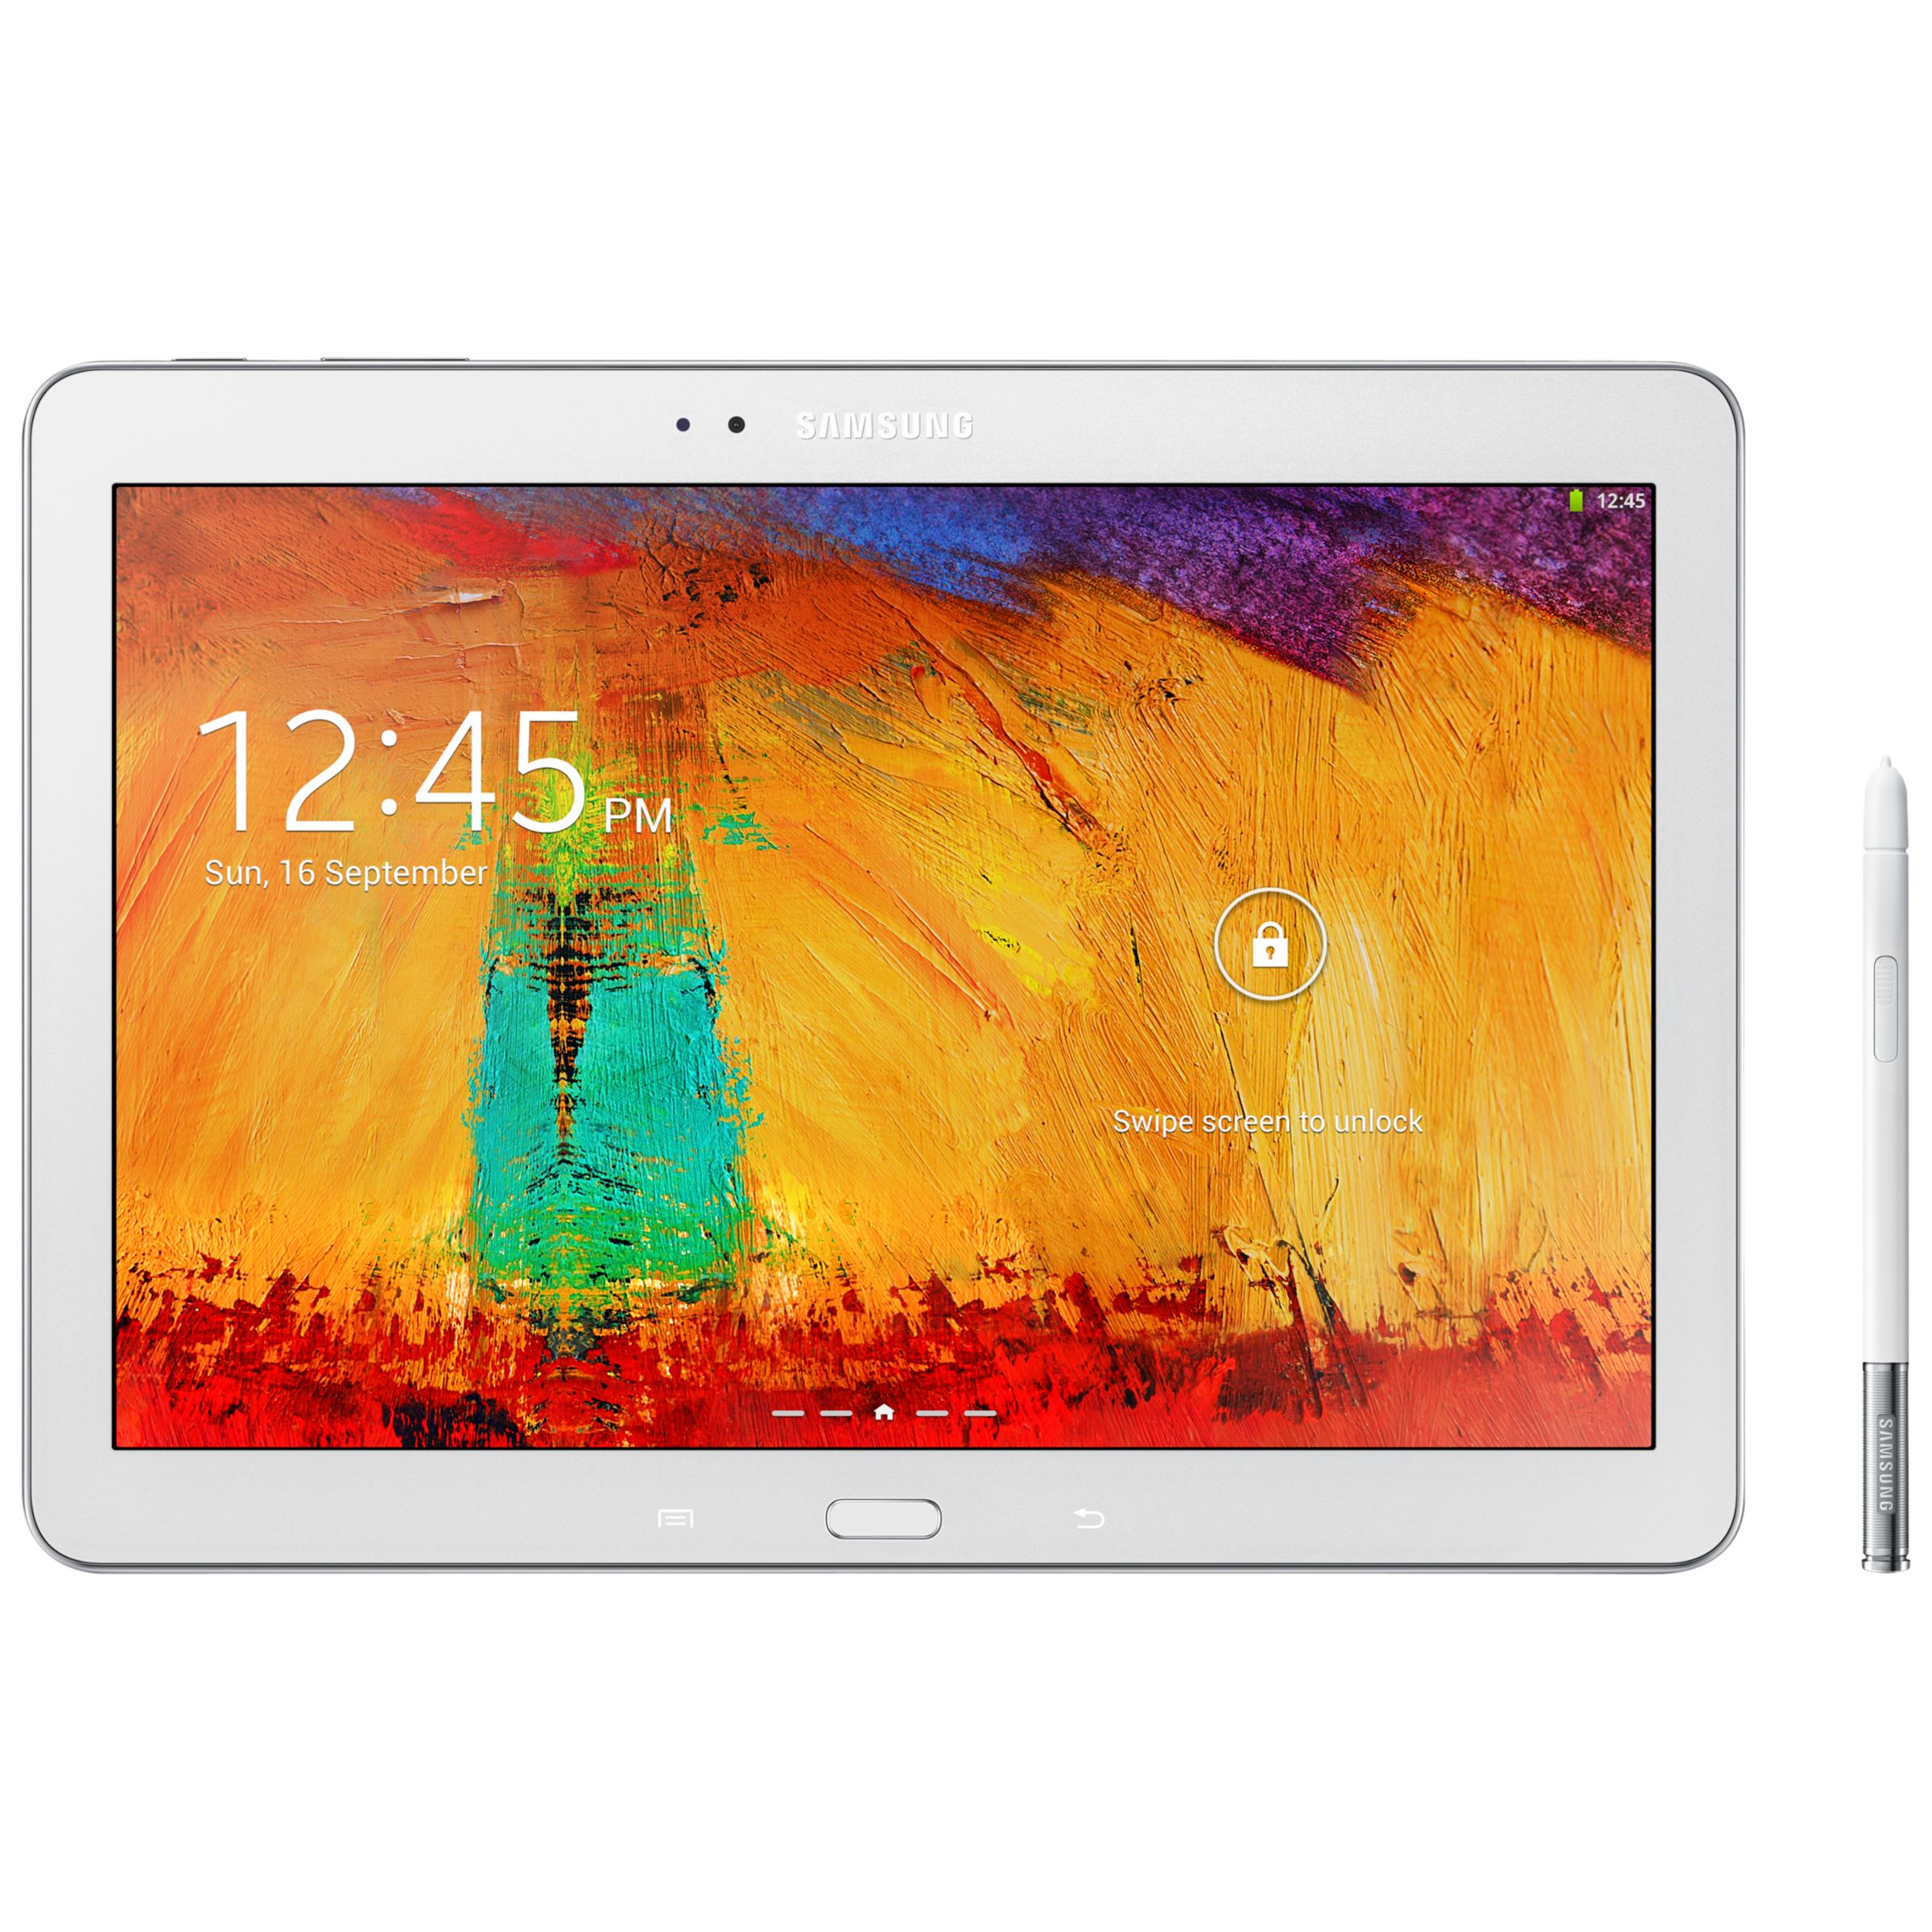 Samsung Galaxy Note 101 2014 Edition Tablet, Octa-Core Samsung Exynos, Android, 101", 16GB, Wi-Fi